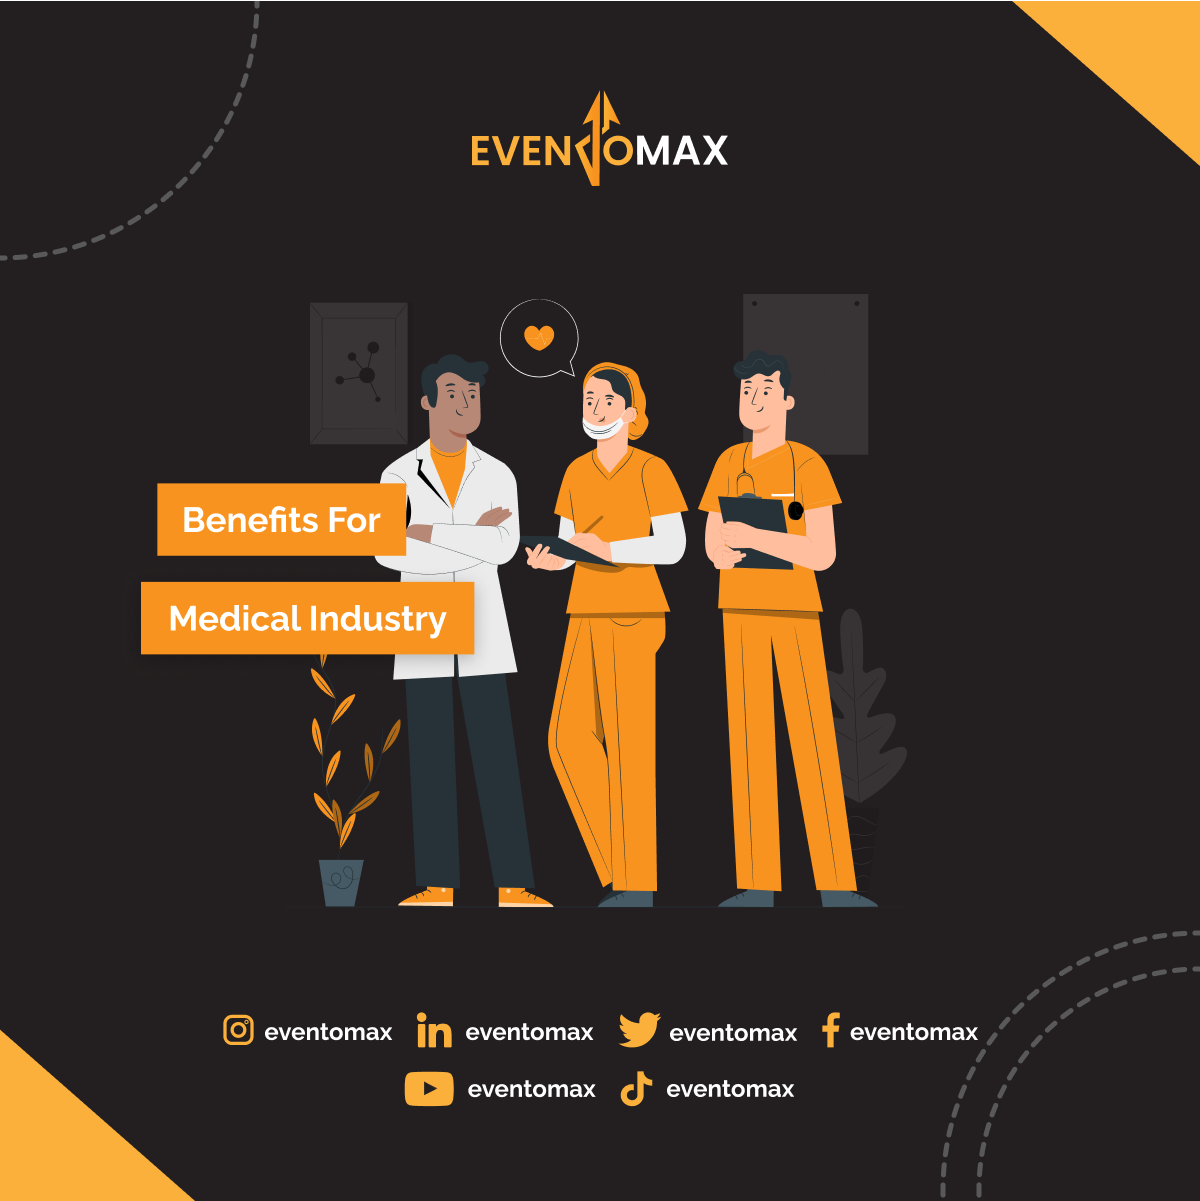 Eventomax Benefits for Medical Industry